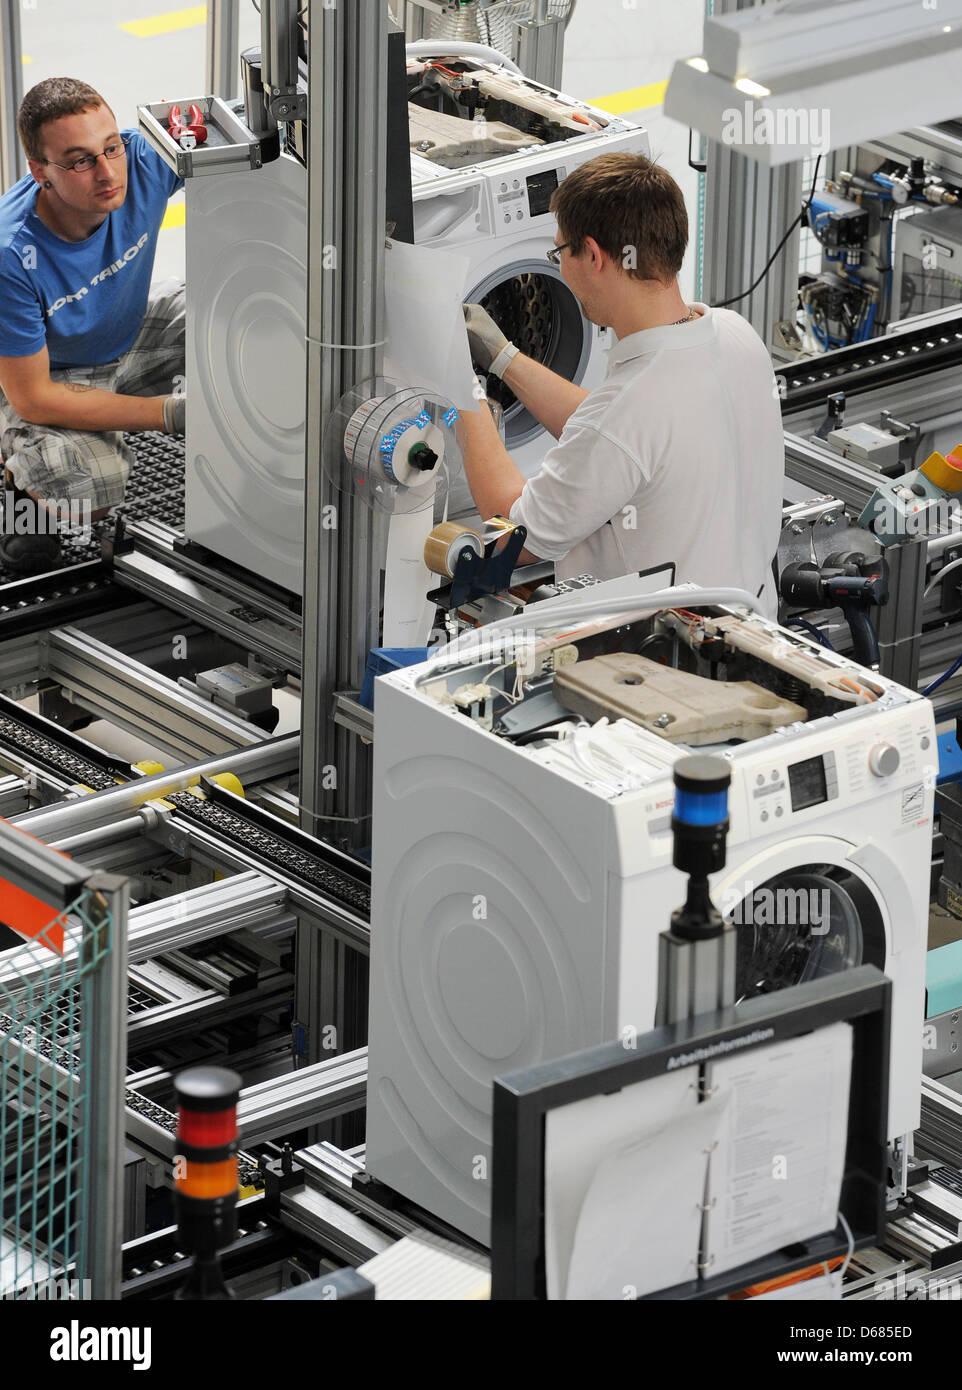 Workers of Bosch Siemens Hausgeraete GmbH assemble washing machines in Nauen, Germany, 4 July 2012. About 600 employees produce approximately 800,000 premium-quality washing machines annually, of which two thirds are exported. BSH Bosch Siemens Hausgeraete GmbH is one of the leading home appliance manufacturer worldwide and the sector's largest company in Europe. Photo: Bernd Settn Stock Photo